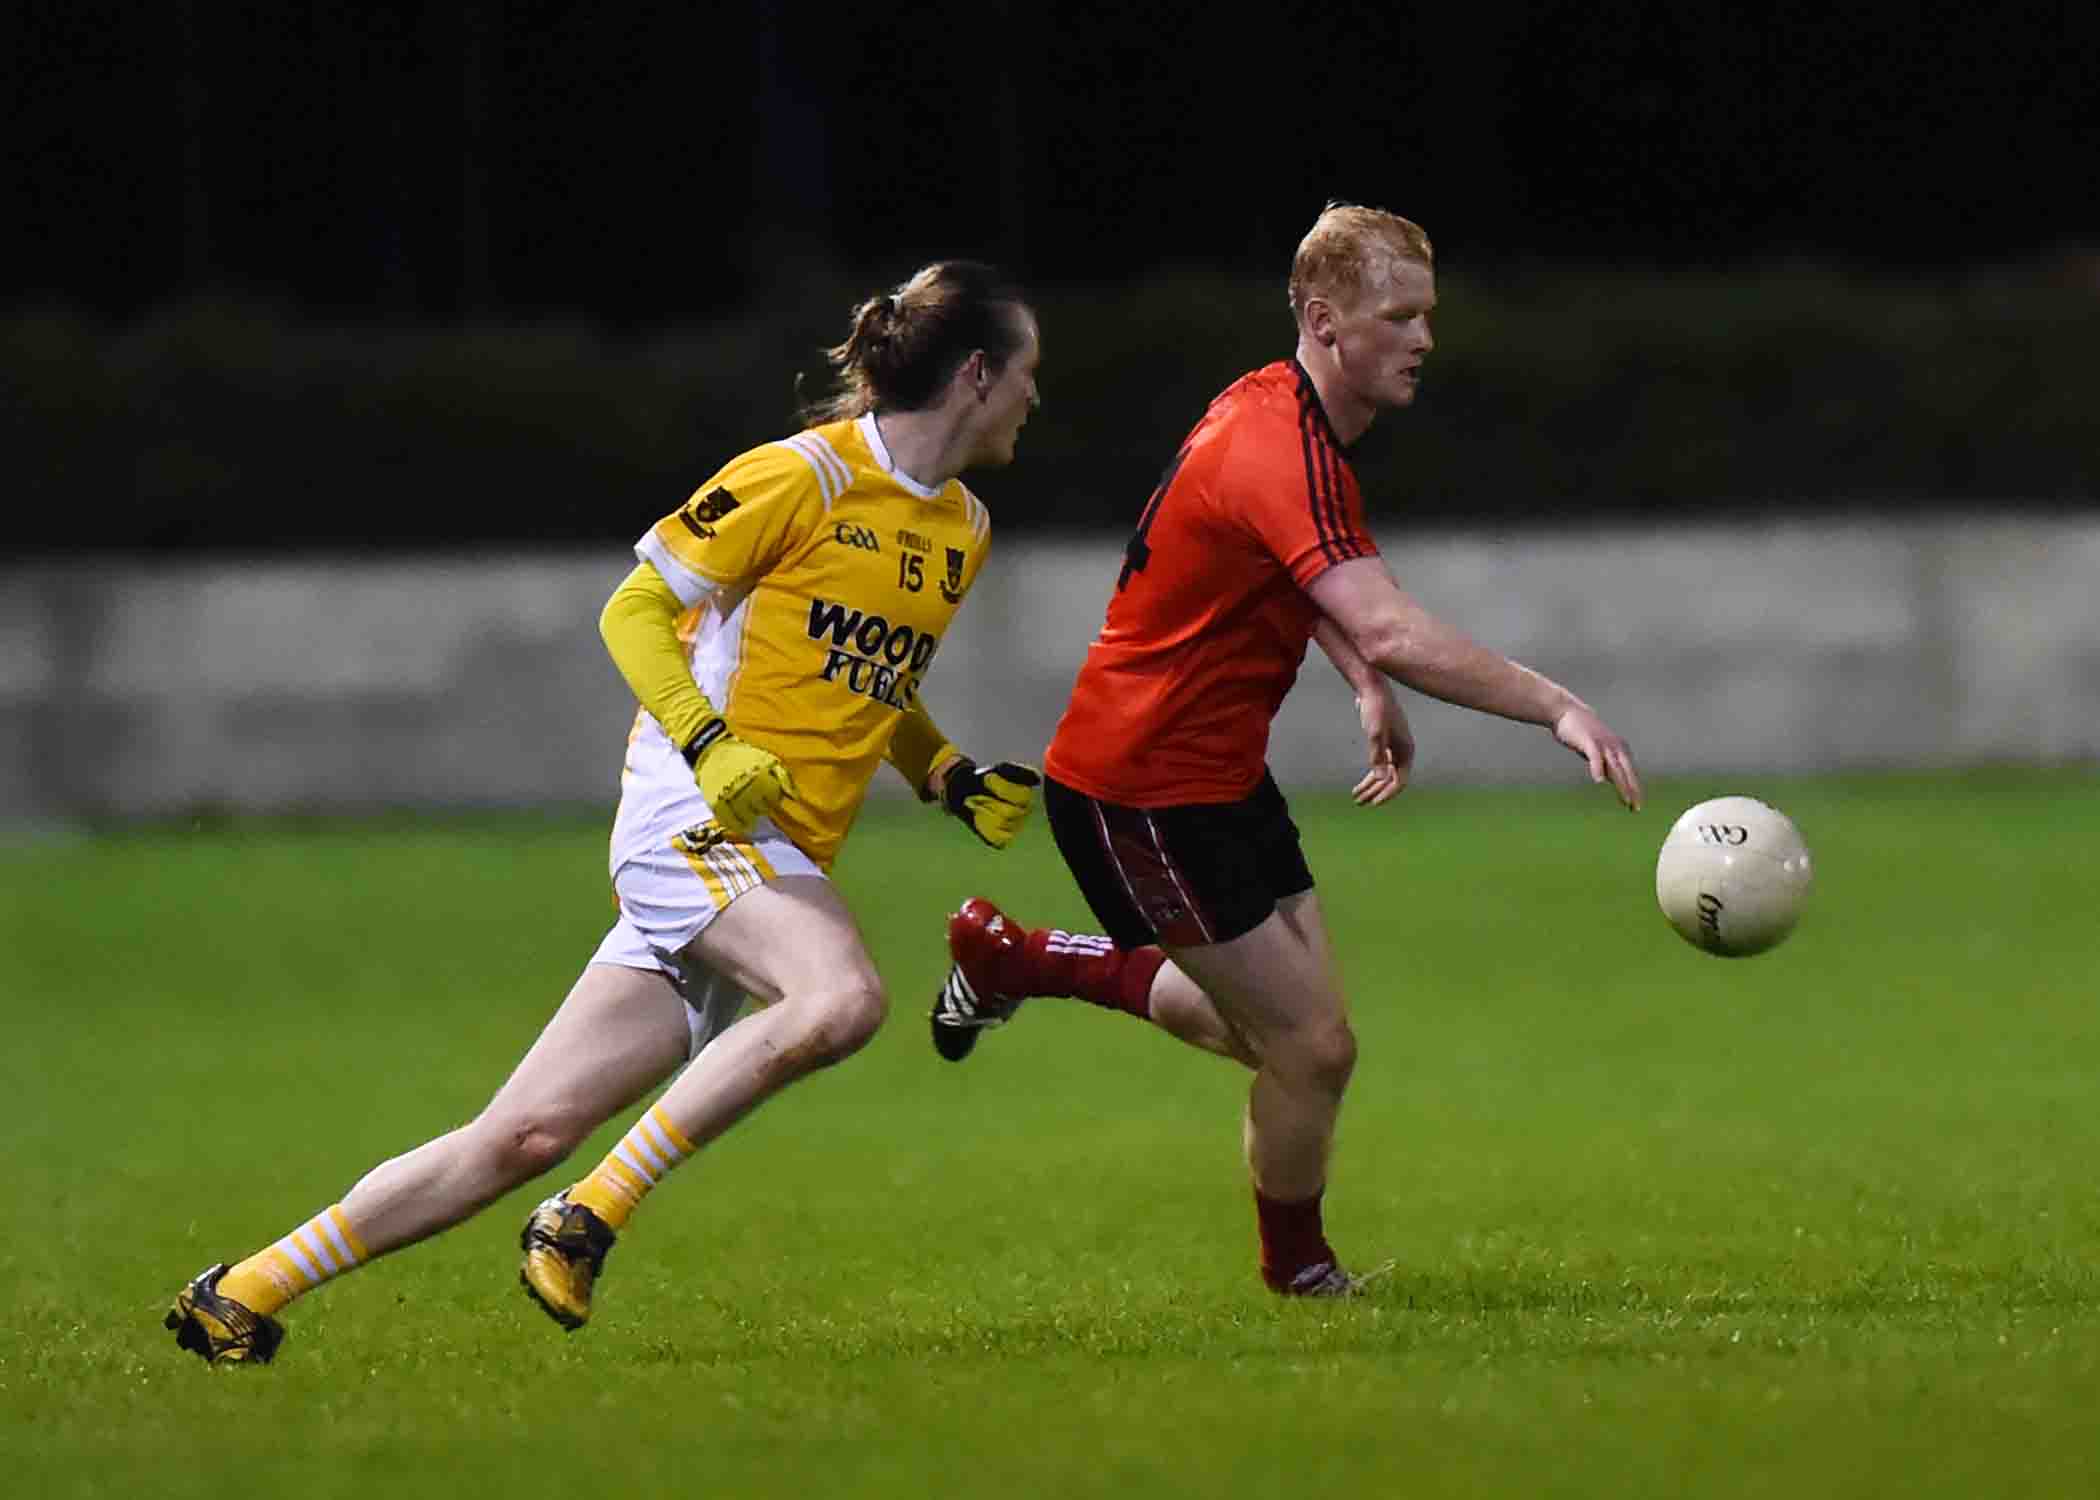 Truagh send Clontibret Packing from the Championship